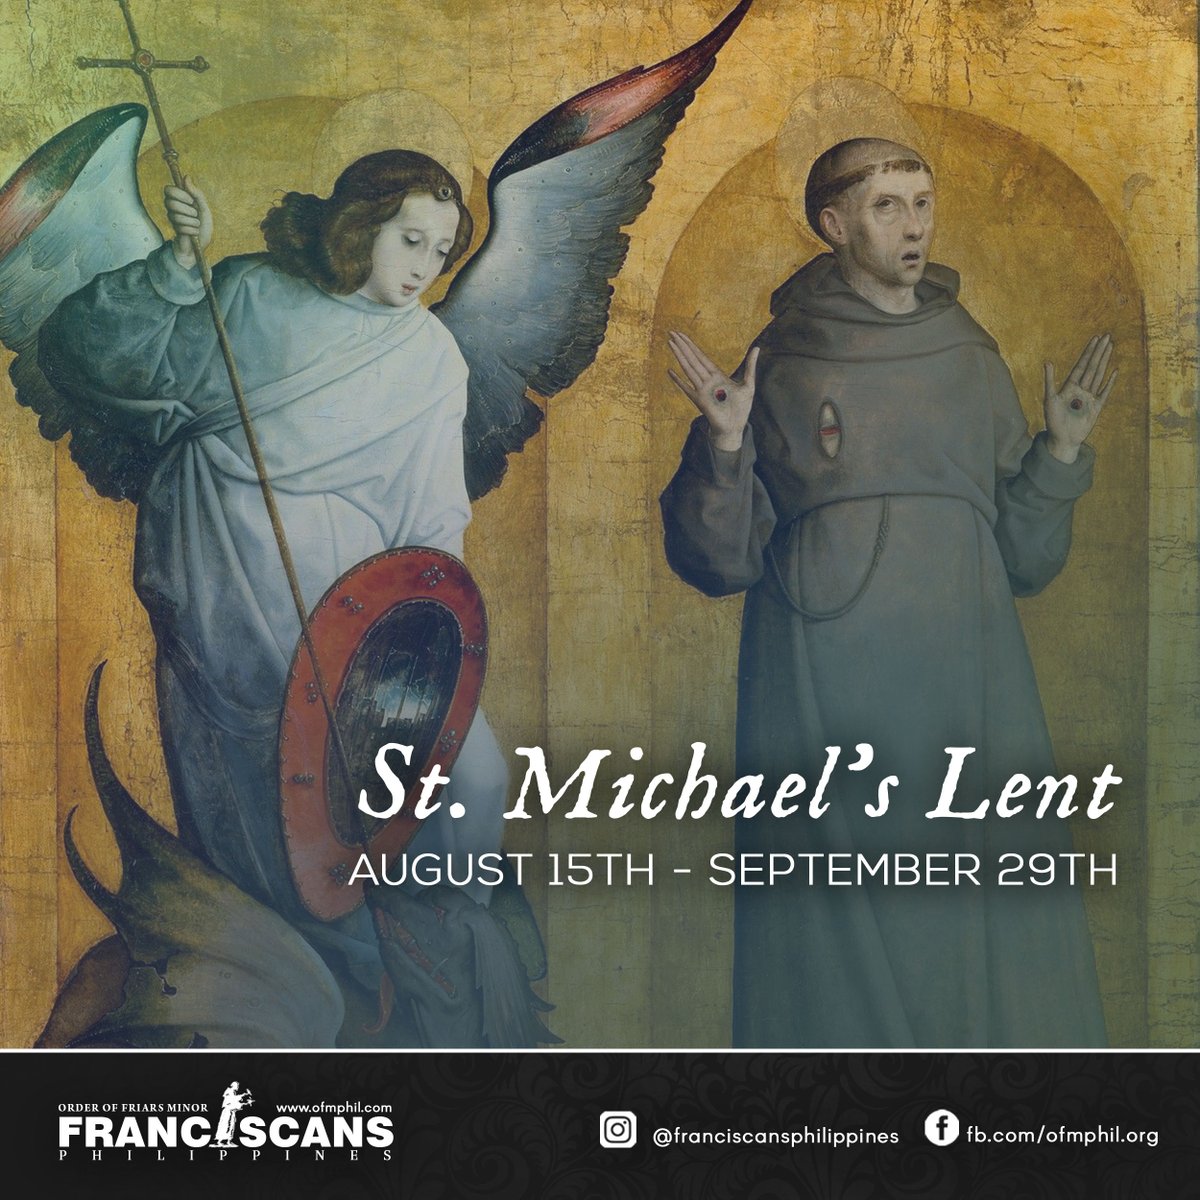 OFM Franciscans PH on Twitter: "SAINT MICHAEL'S LENT August 15th-September  29th St. Francis, known for his deep devotion to the Blessed Virgin Mary  and St. Michael the Archangel, Prince of angels and